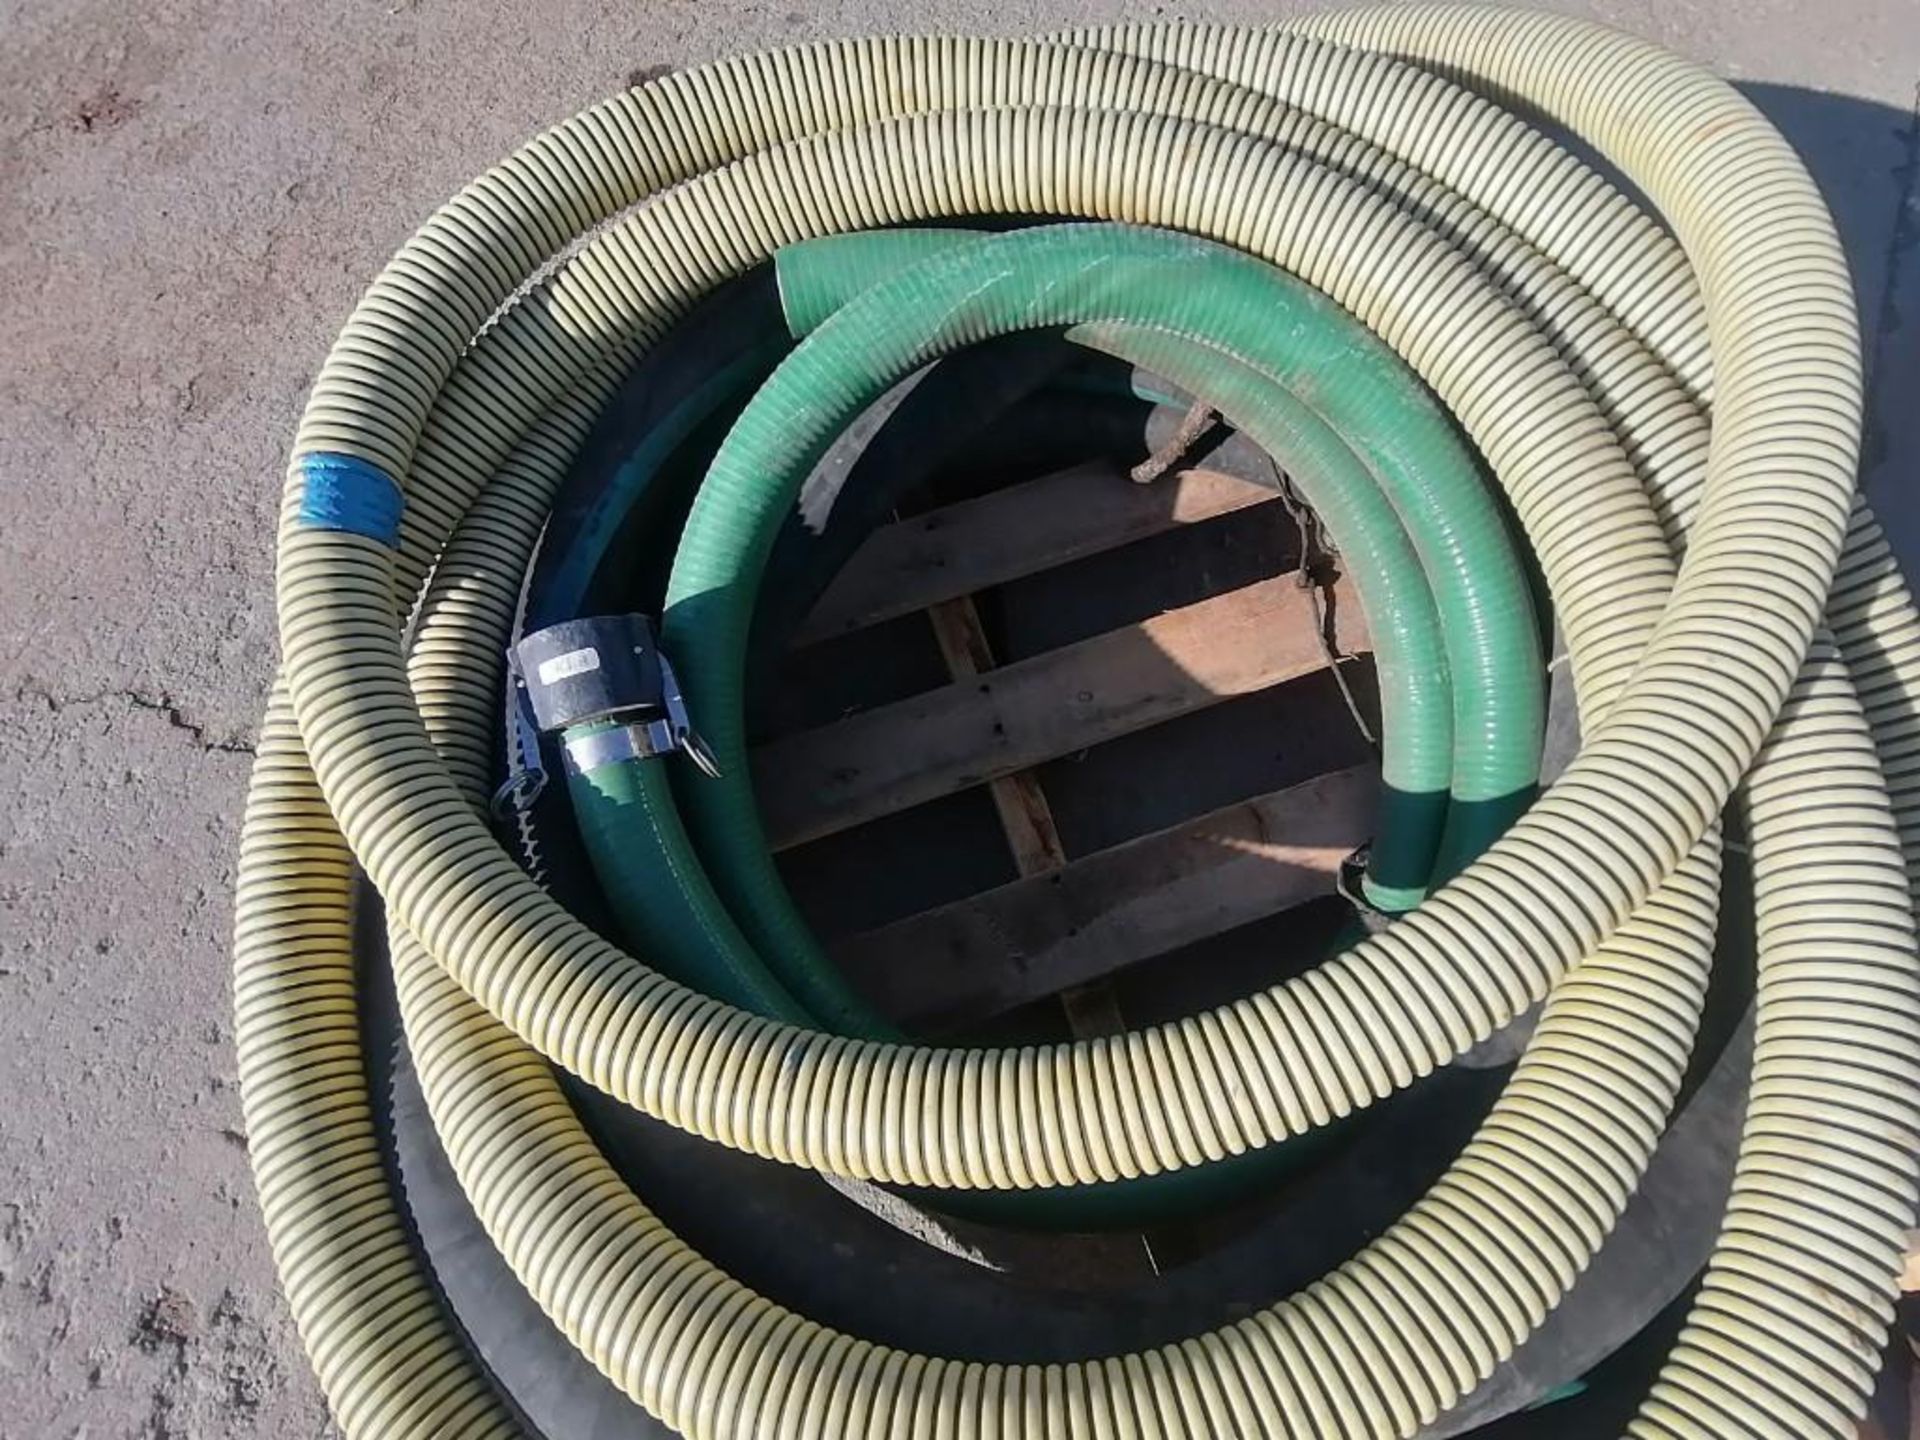 (1) Airplaco Pump Master Model MJ-16, Serial #12280 with (3) Suction Hoses. Located in Mt. Pleasant, - Image 15 of 16